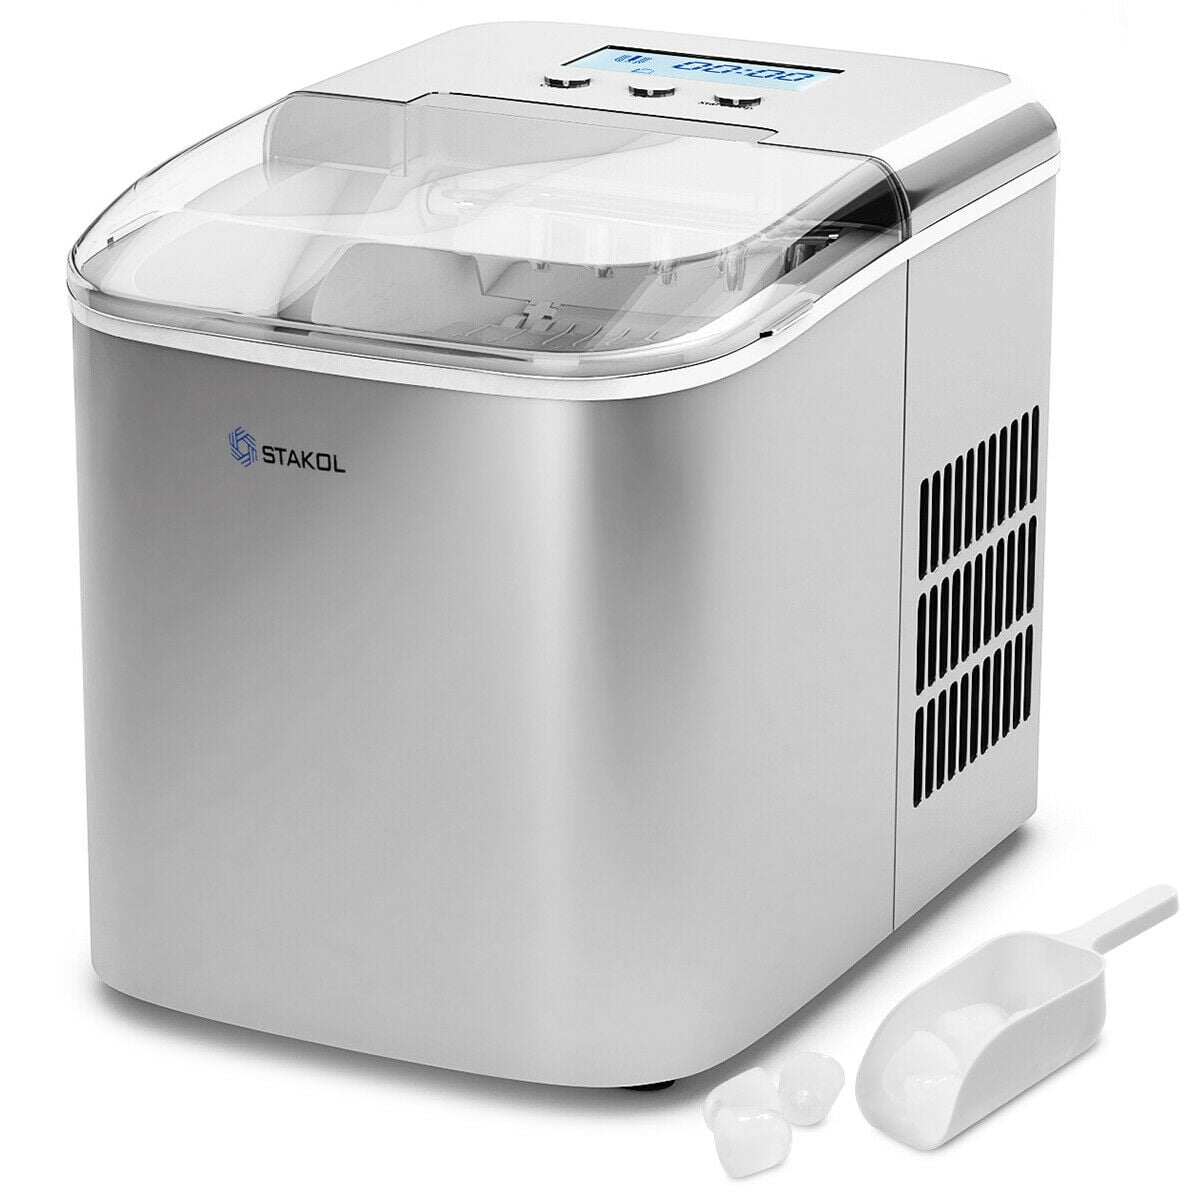 Thermostar Tsicebnhsc26sl 26-Pound Automatic Self-Cleaning Portable Countertop Ice Maker Machine, Silver